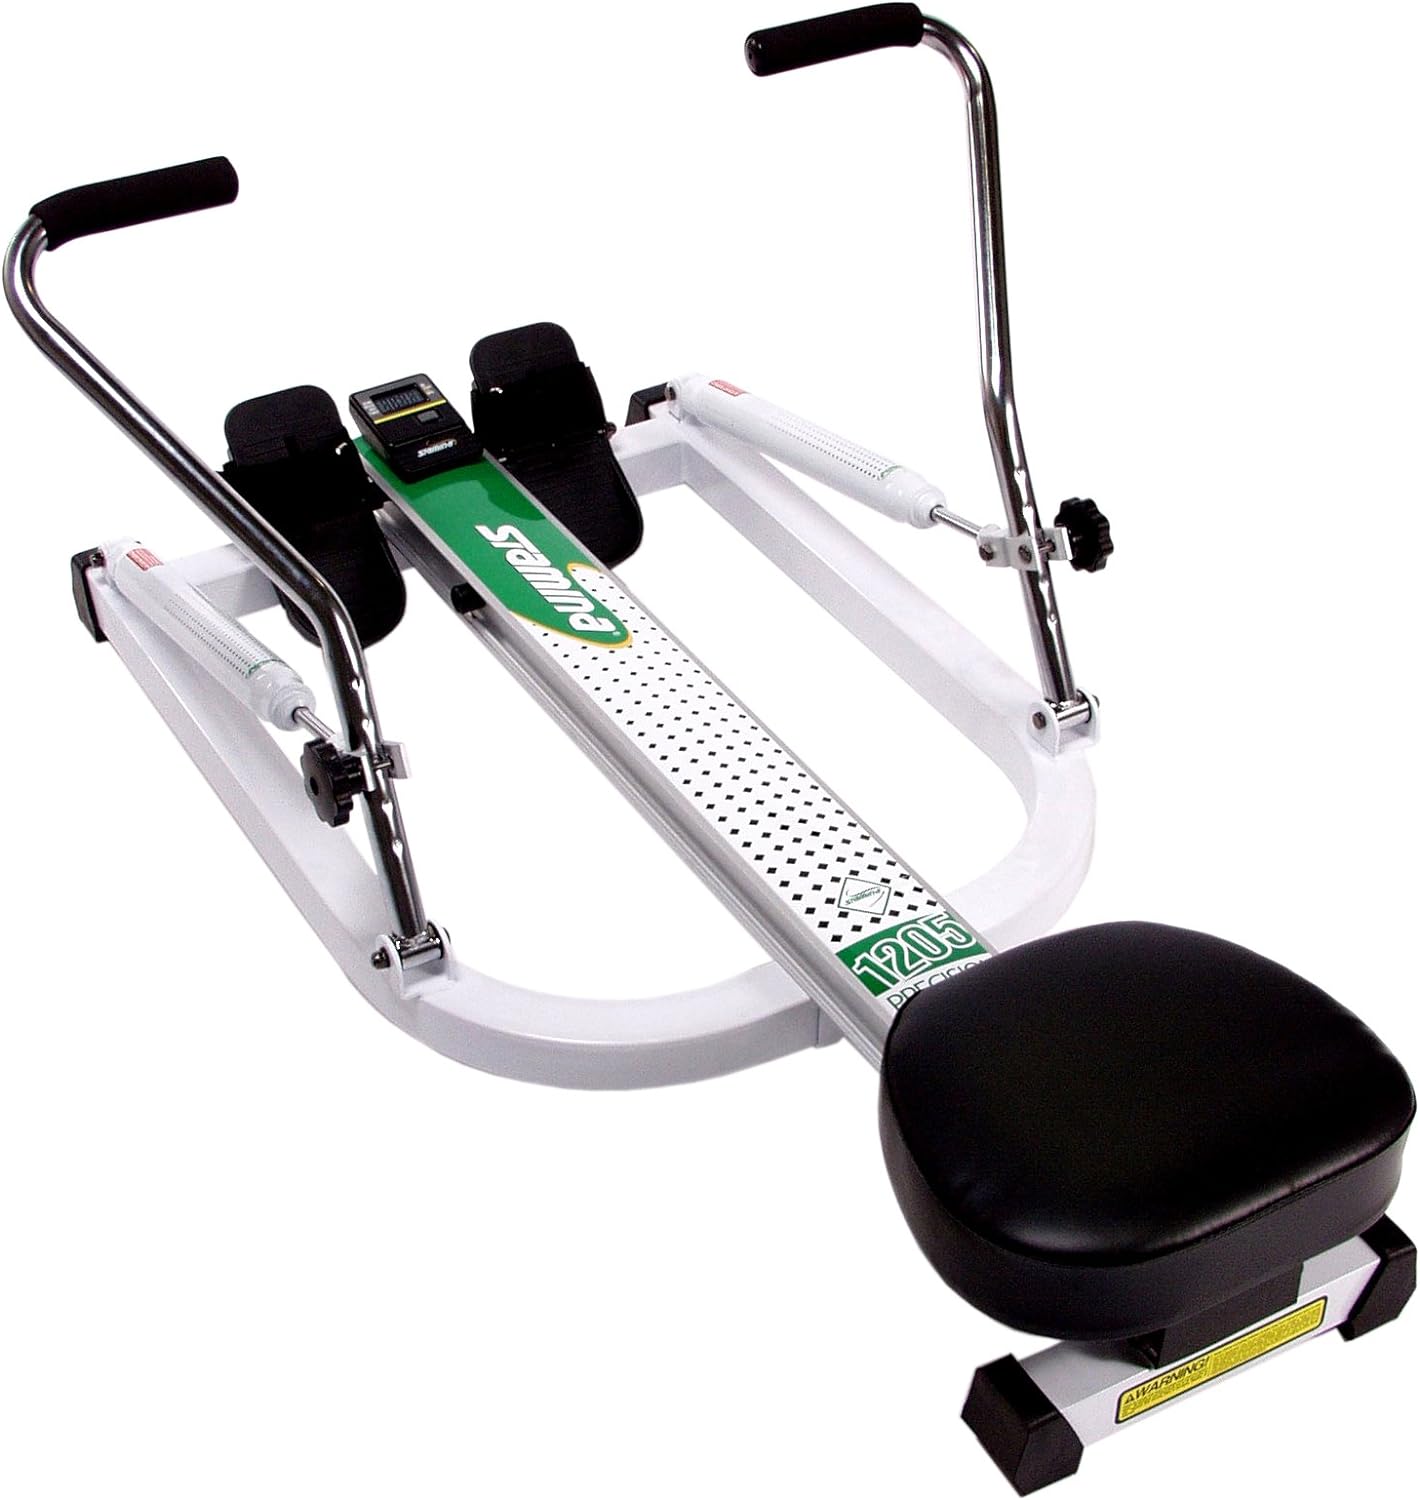 STAMINA Precision Hydraulic Rower 1205 Review